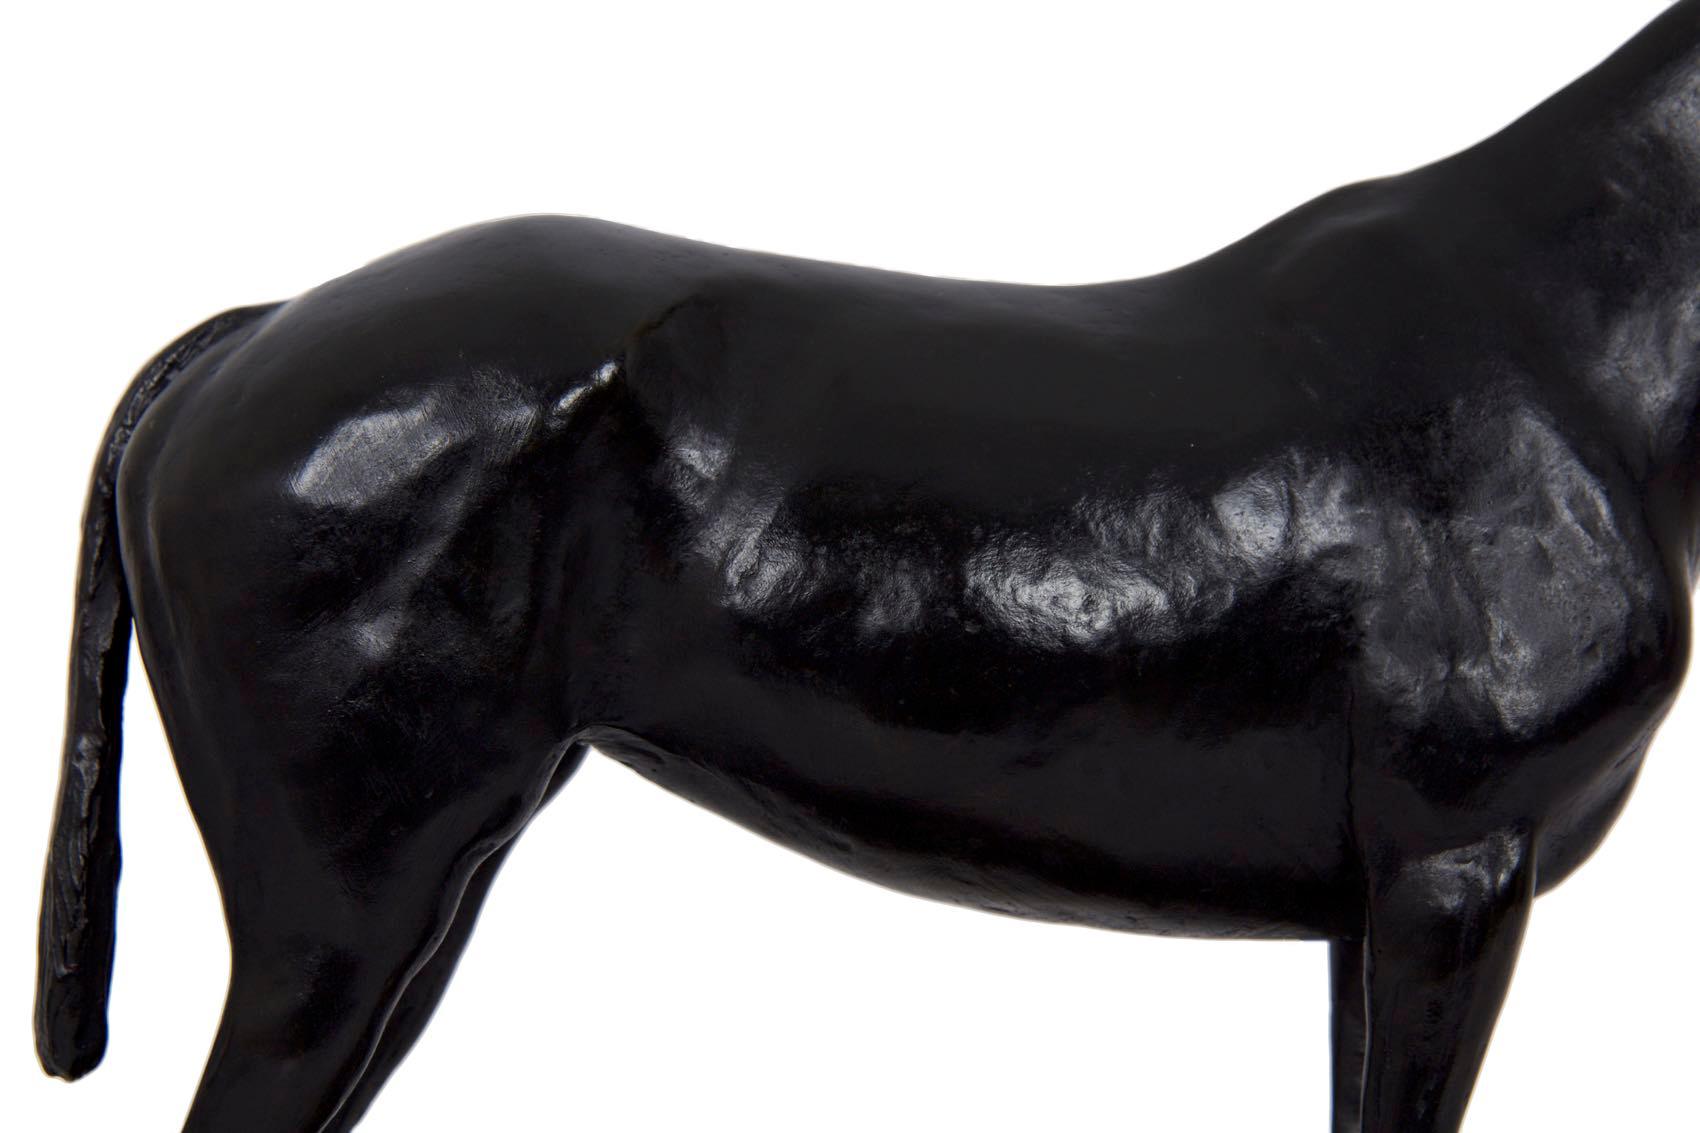 A fine modernist Equestrian study by Mary Stewart La BoyTeaux, the bronze sculpture was executed using the lost-wax method at the Roman Bronze Works foundry in New York and is situated over an original black slate base. The corner of the base is